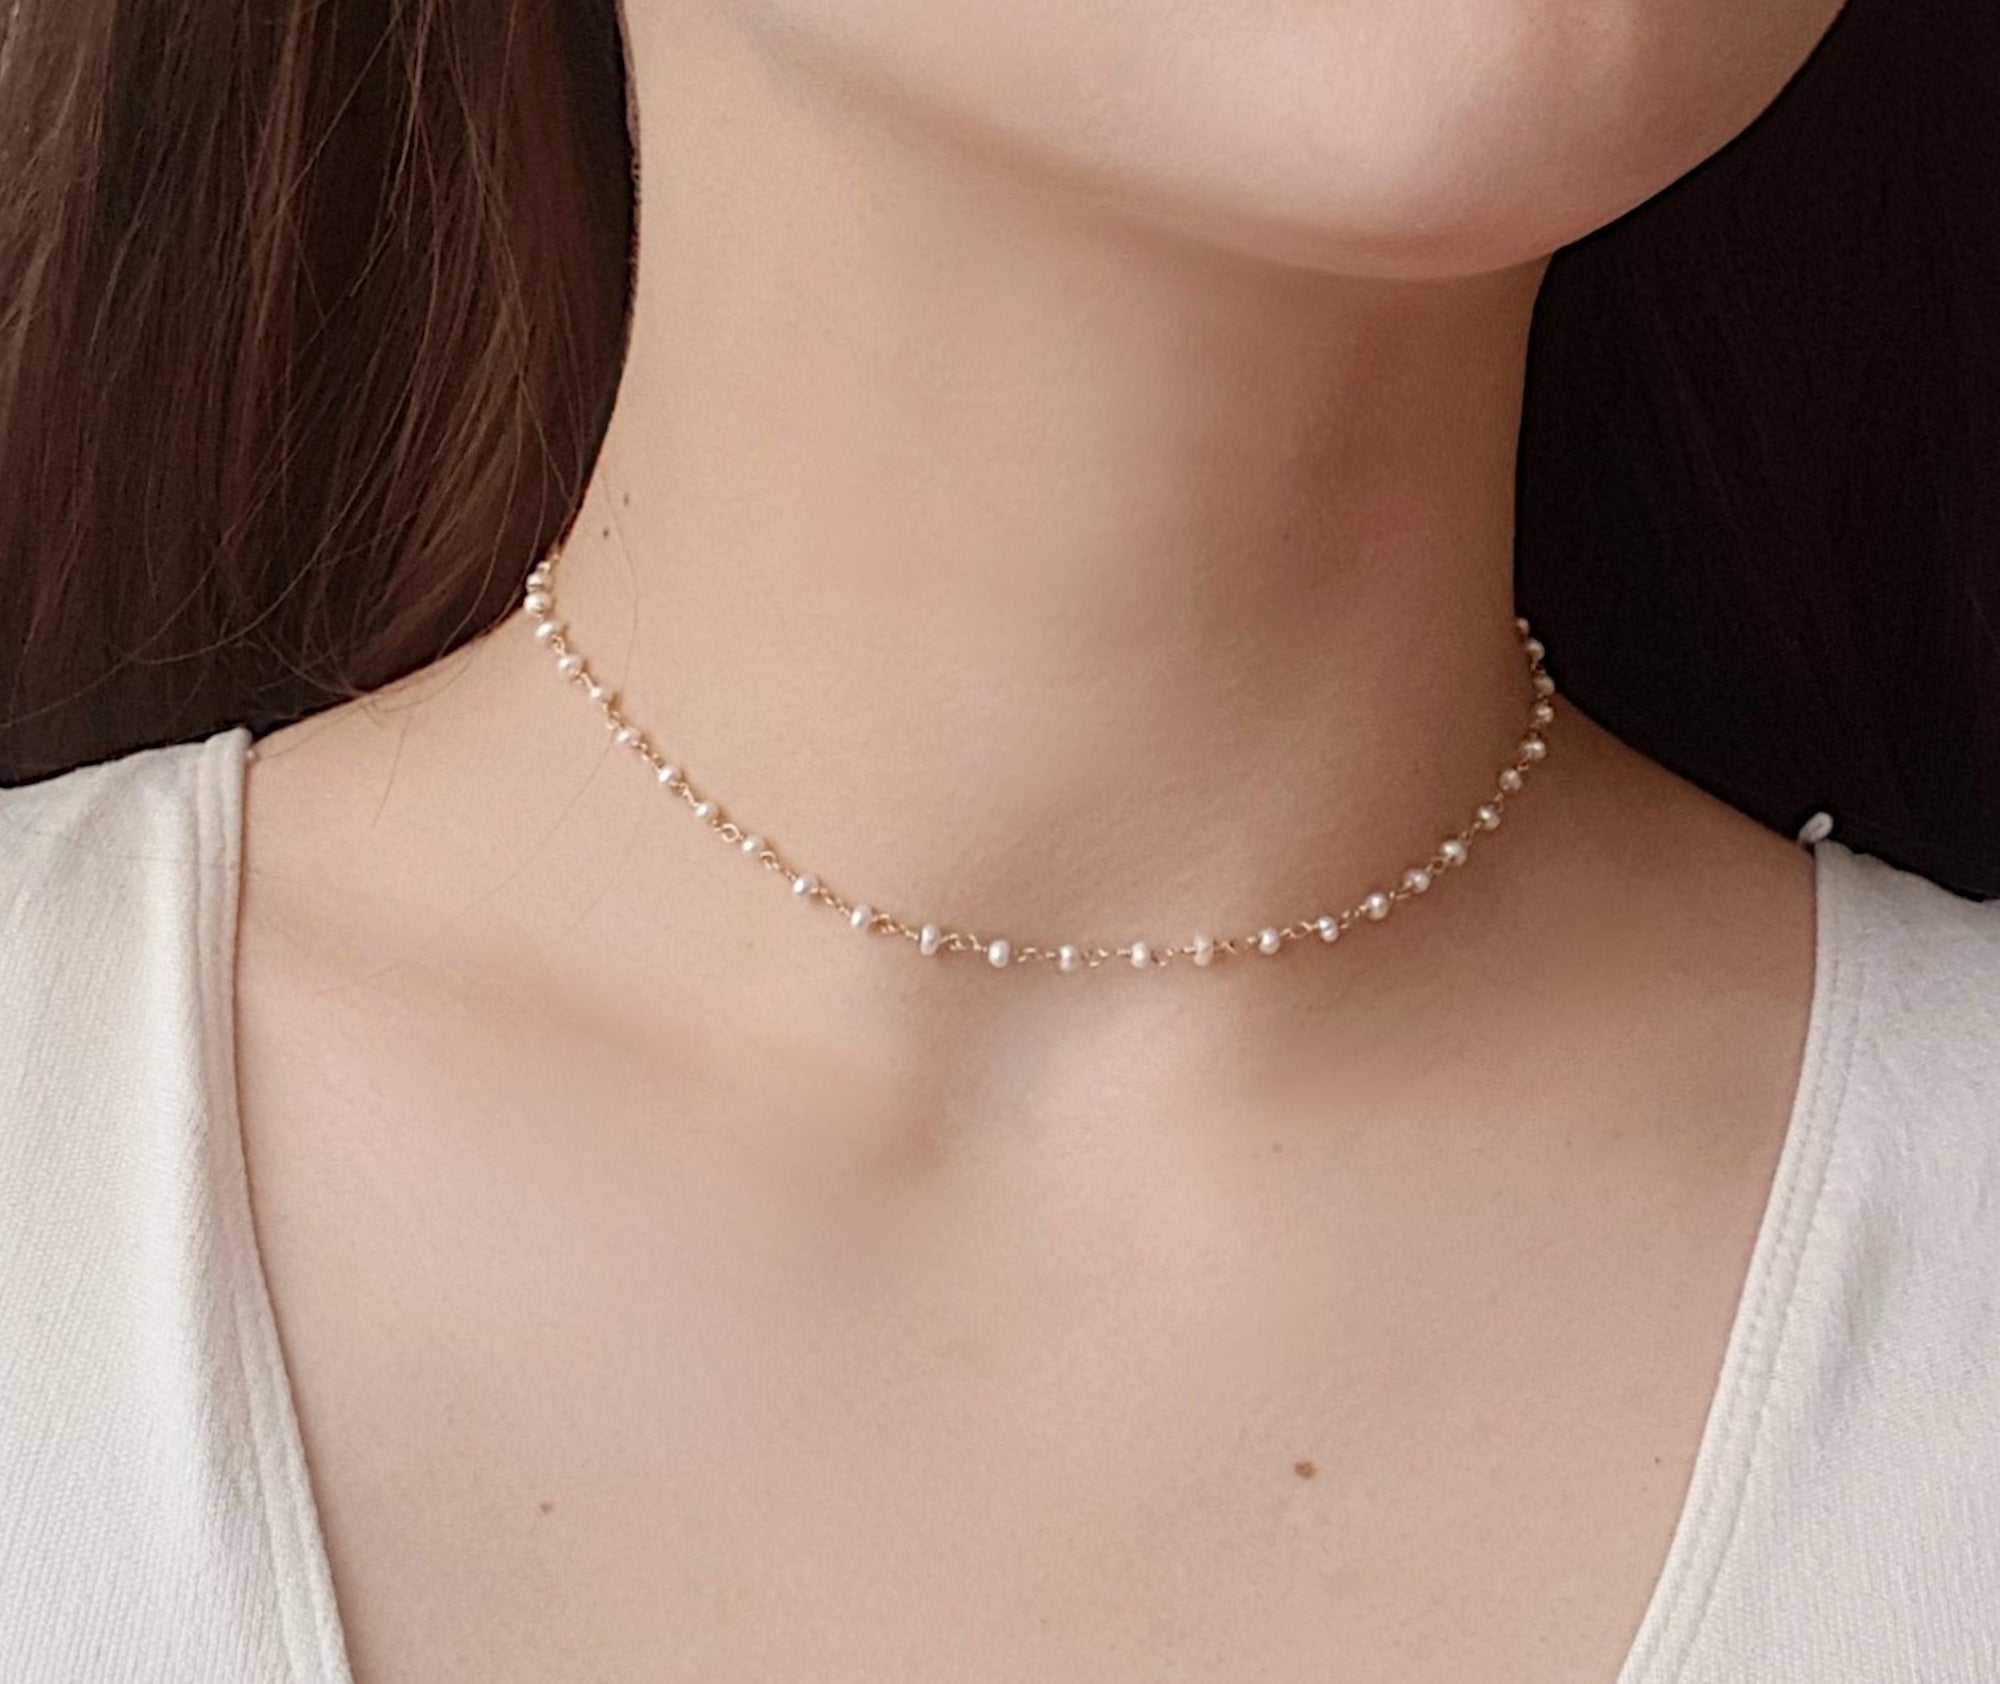 Dainty Pearl Necklace – 𝗔𝘀𝗽 𝗙𝗮𝘀𝗵𝗶𝗼𝗻 𝗝𝗲𝘄𝗲𝗹𝗹𝗲𝗿𝘆